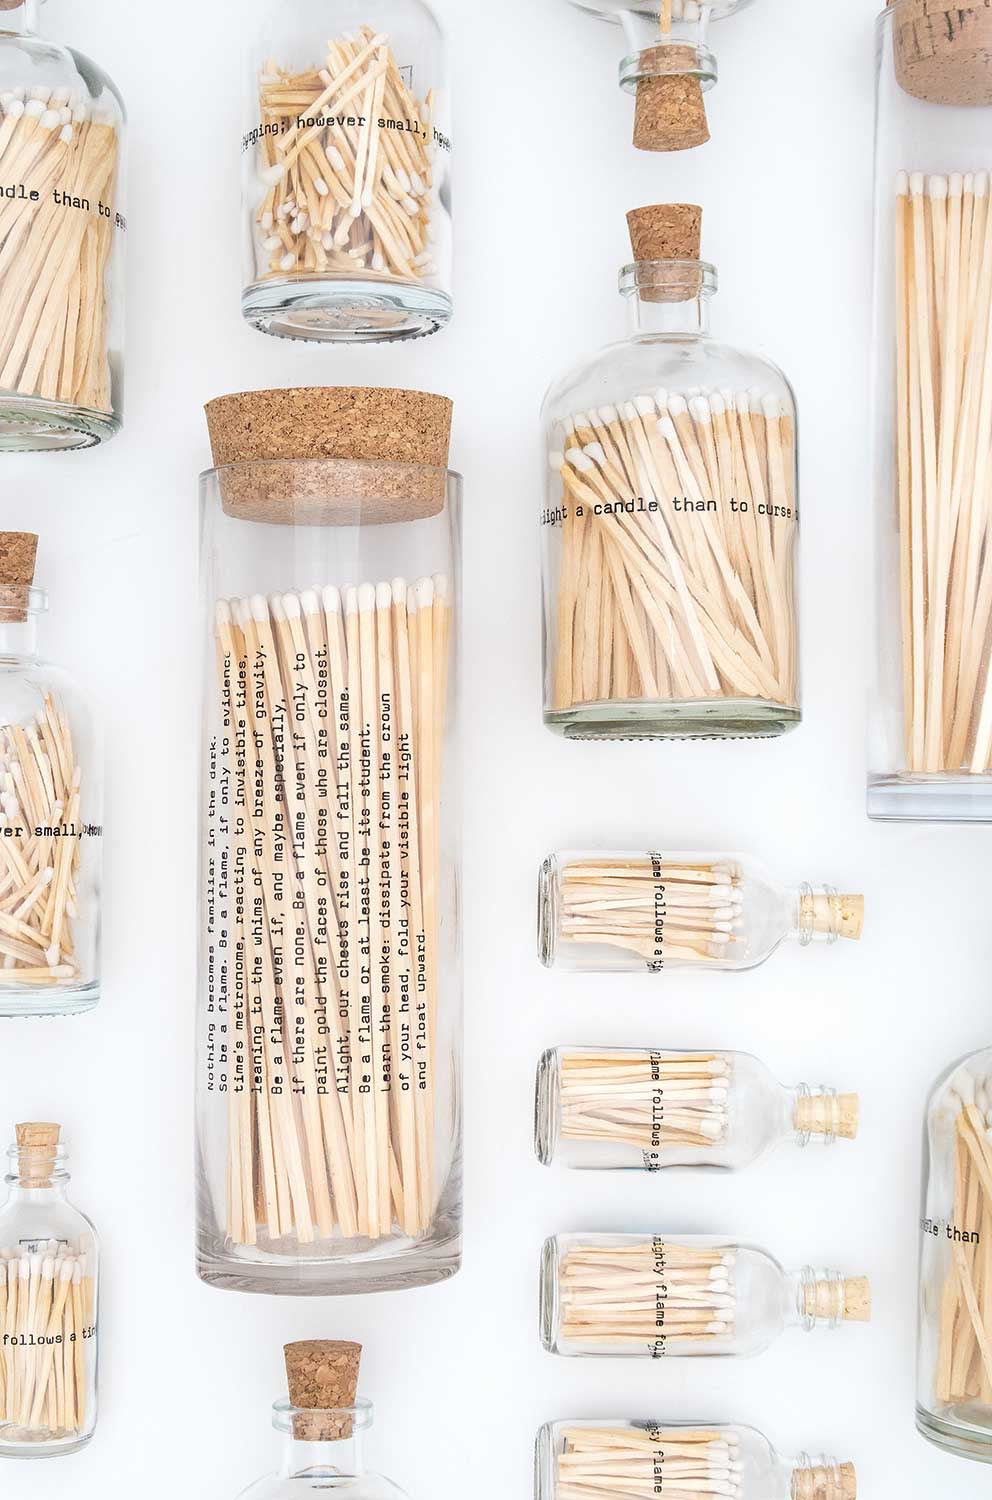 Apothecary Match Bottles - Poetry